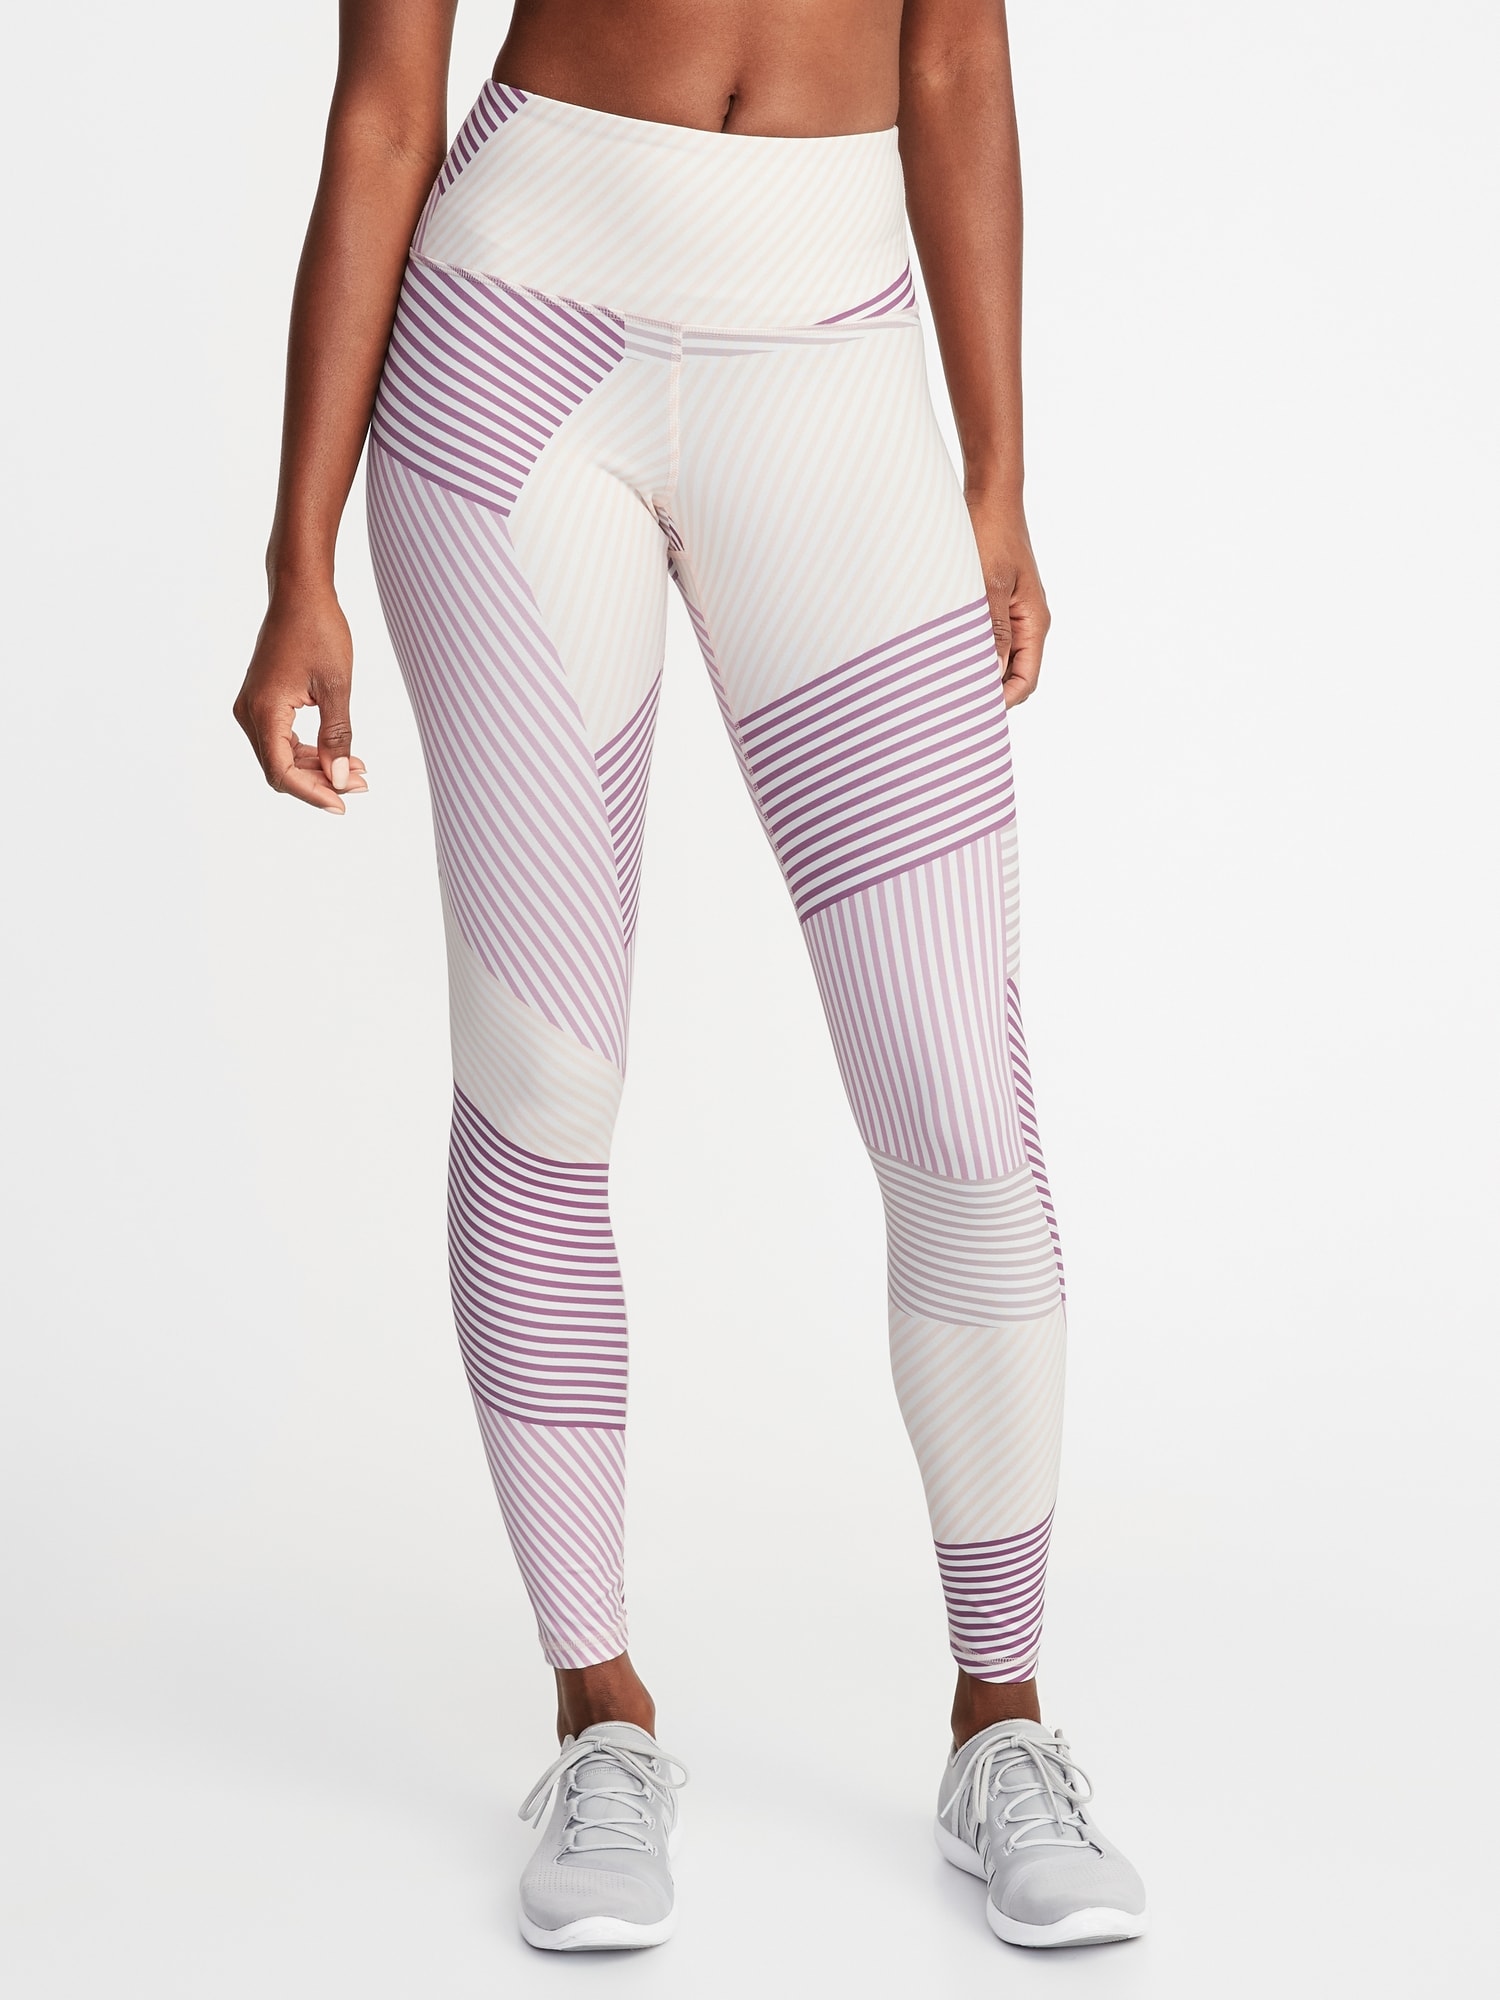 Old Navy Women's Cloud Compression Leggings